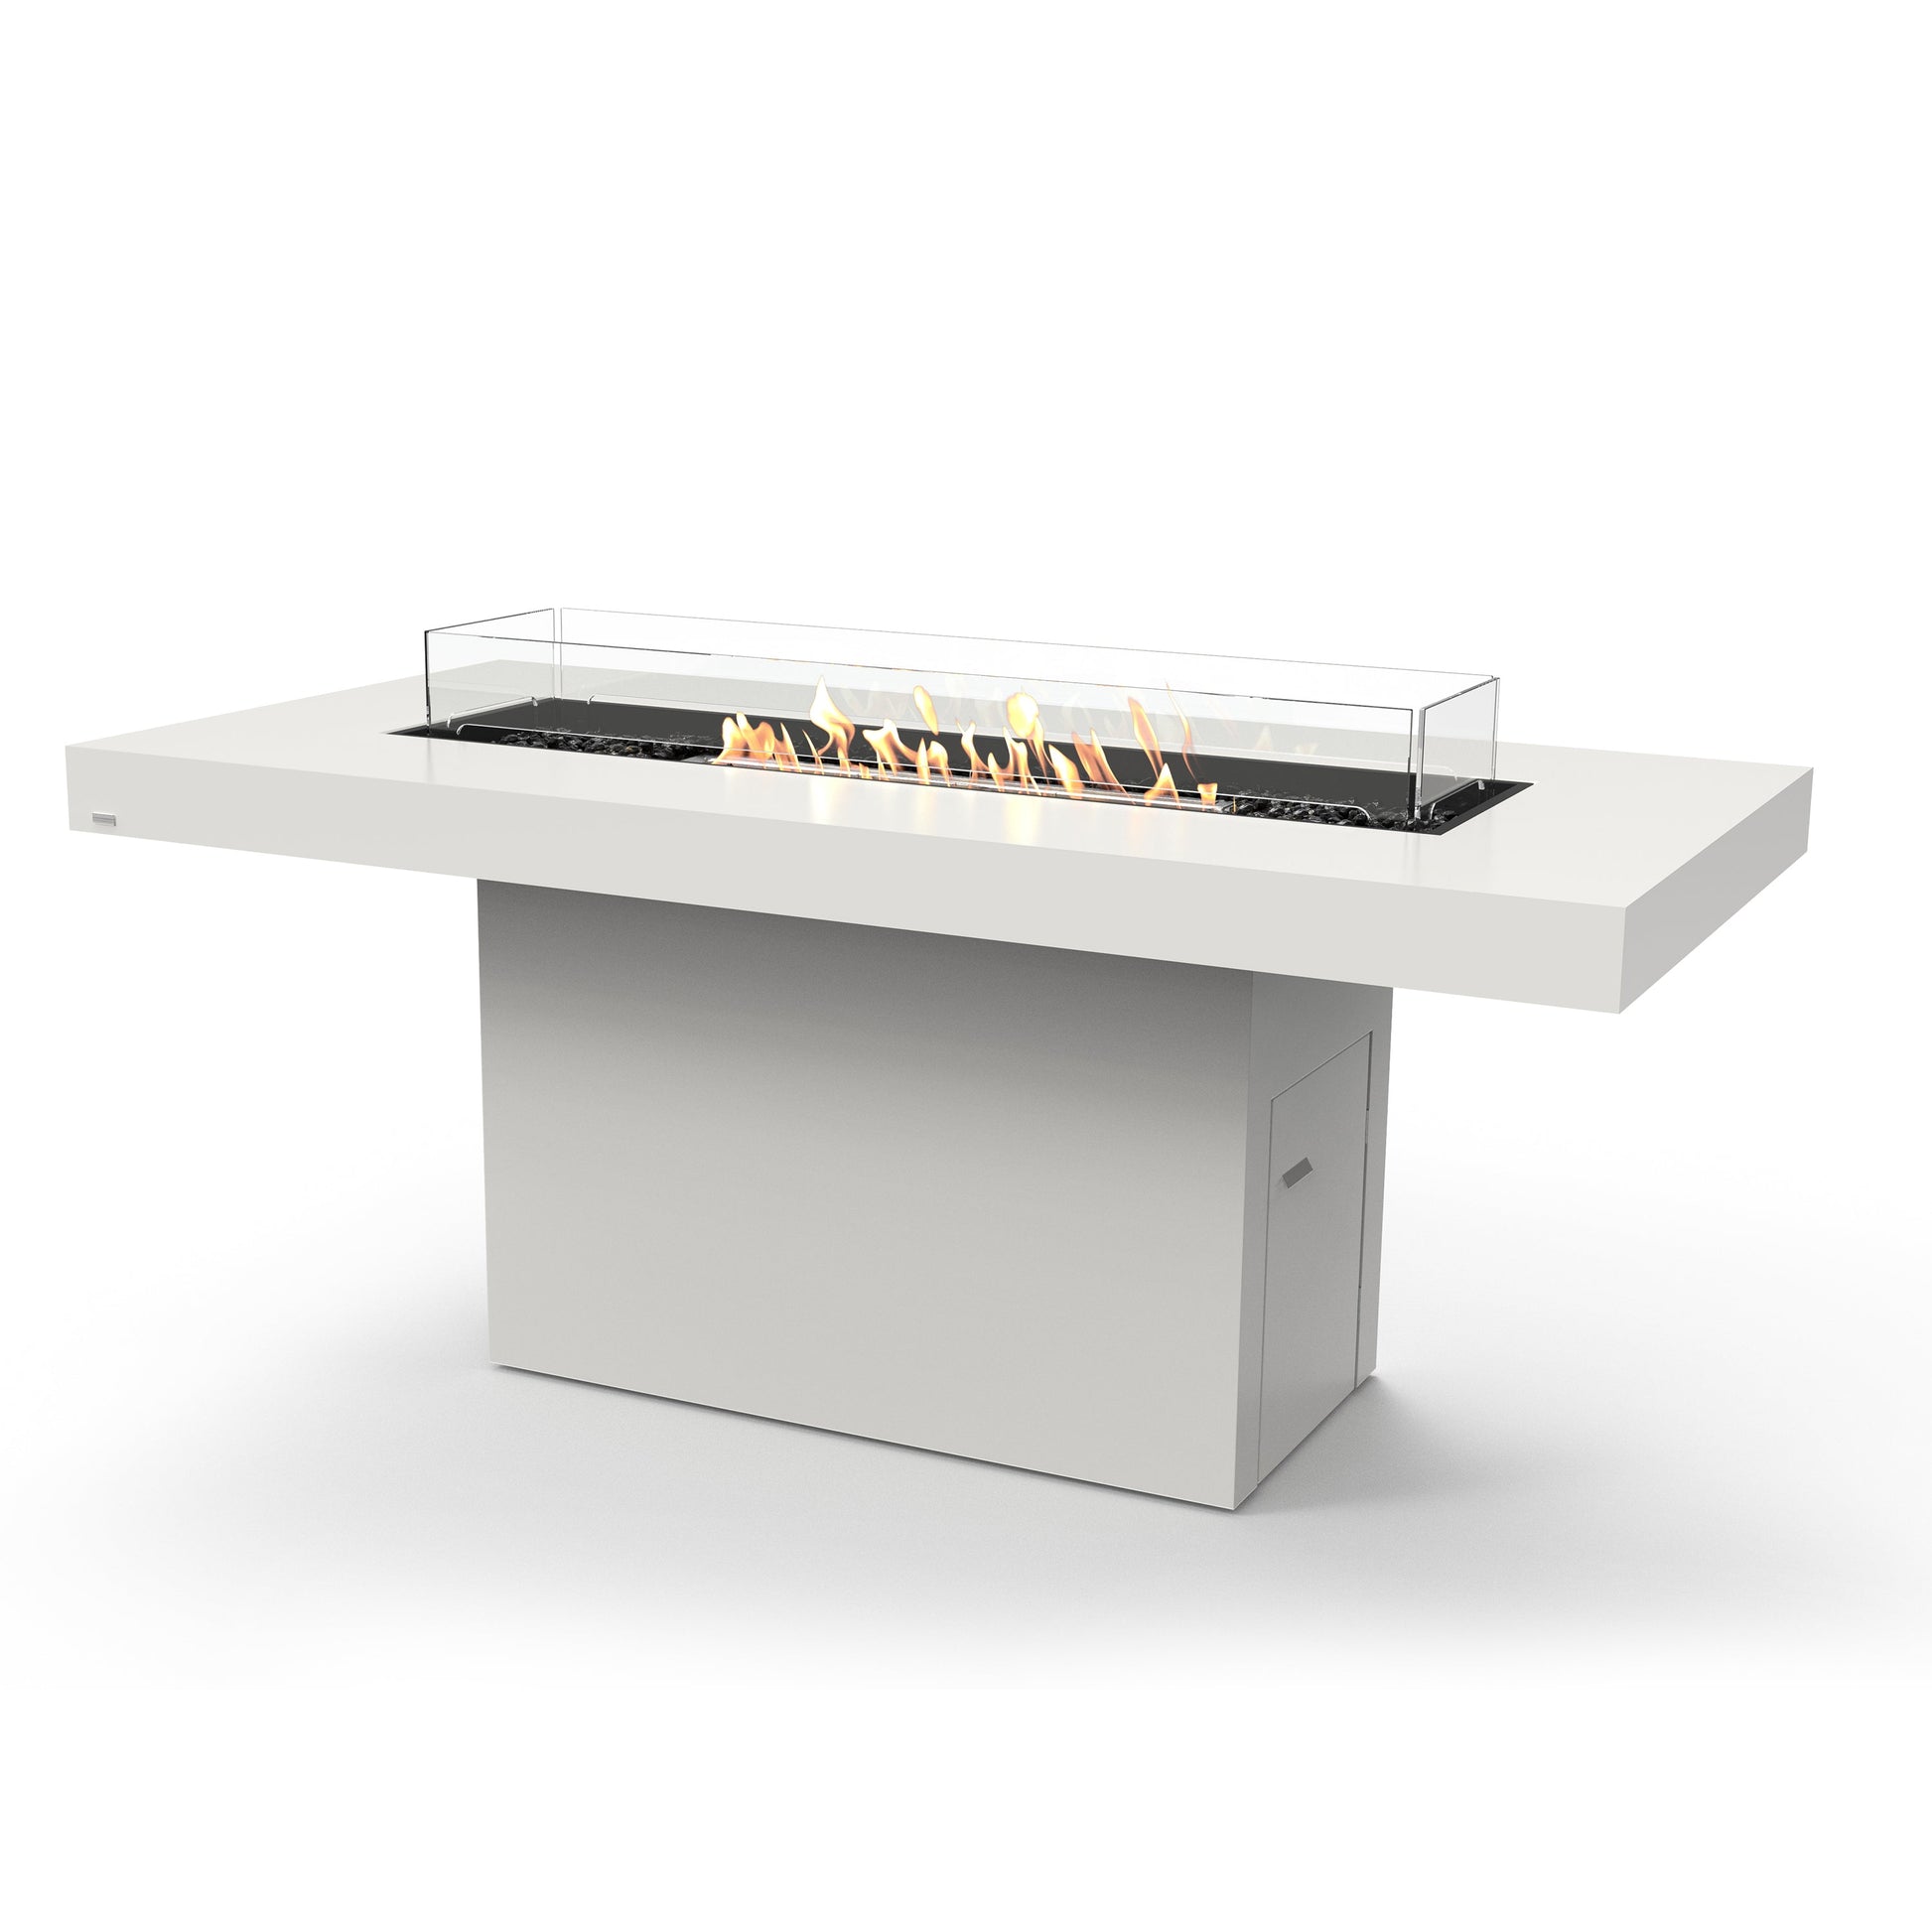 EcoSmart Fire 89" Gin 90 Bar Height Fire Pit Table with Ethanol Burner by Mad Design Group